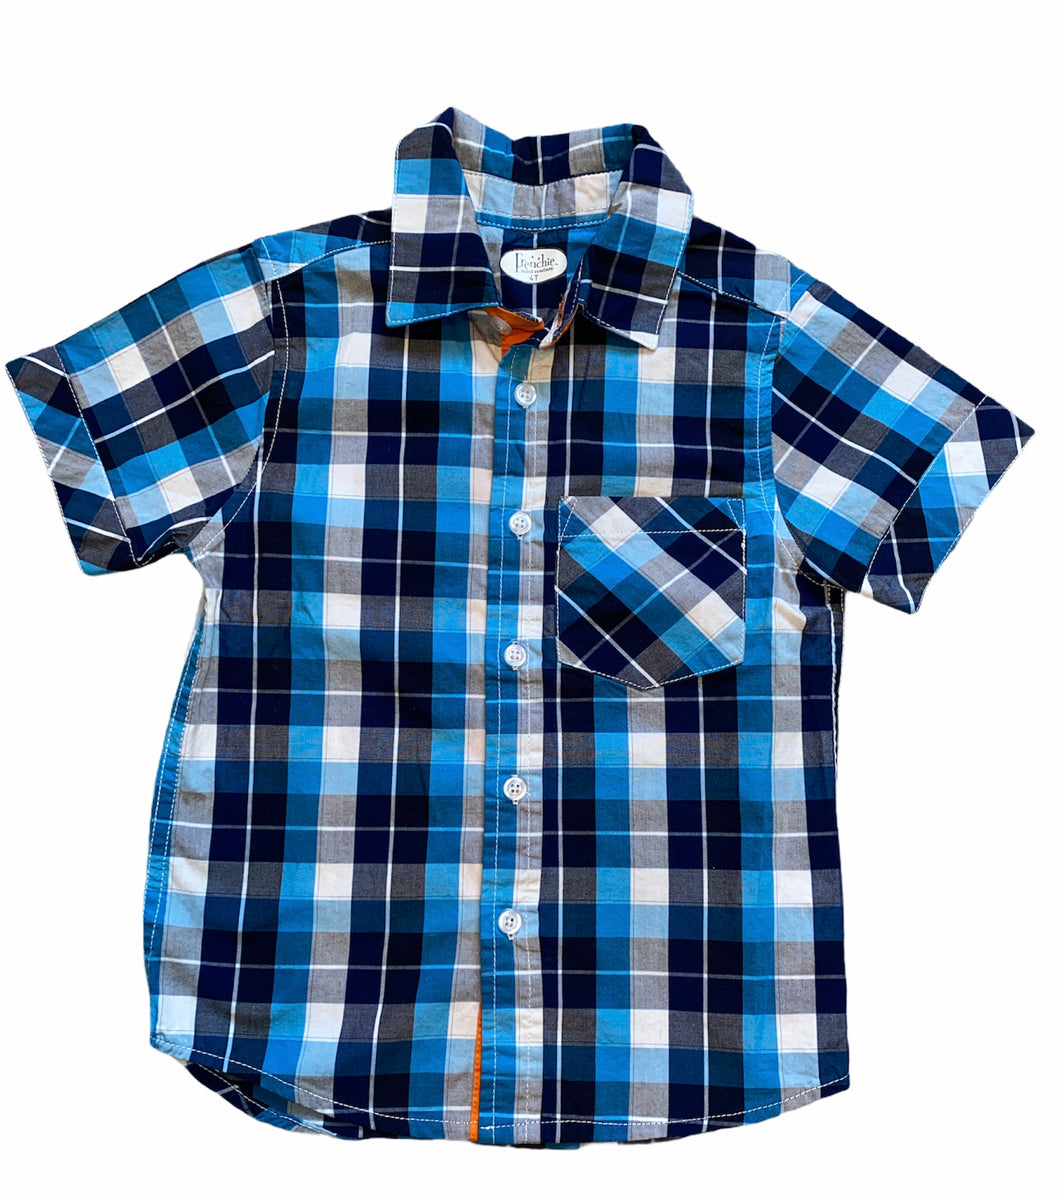 Frenchie mini couture toddler boys checkered button down short sleeve shirt 4T